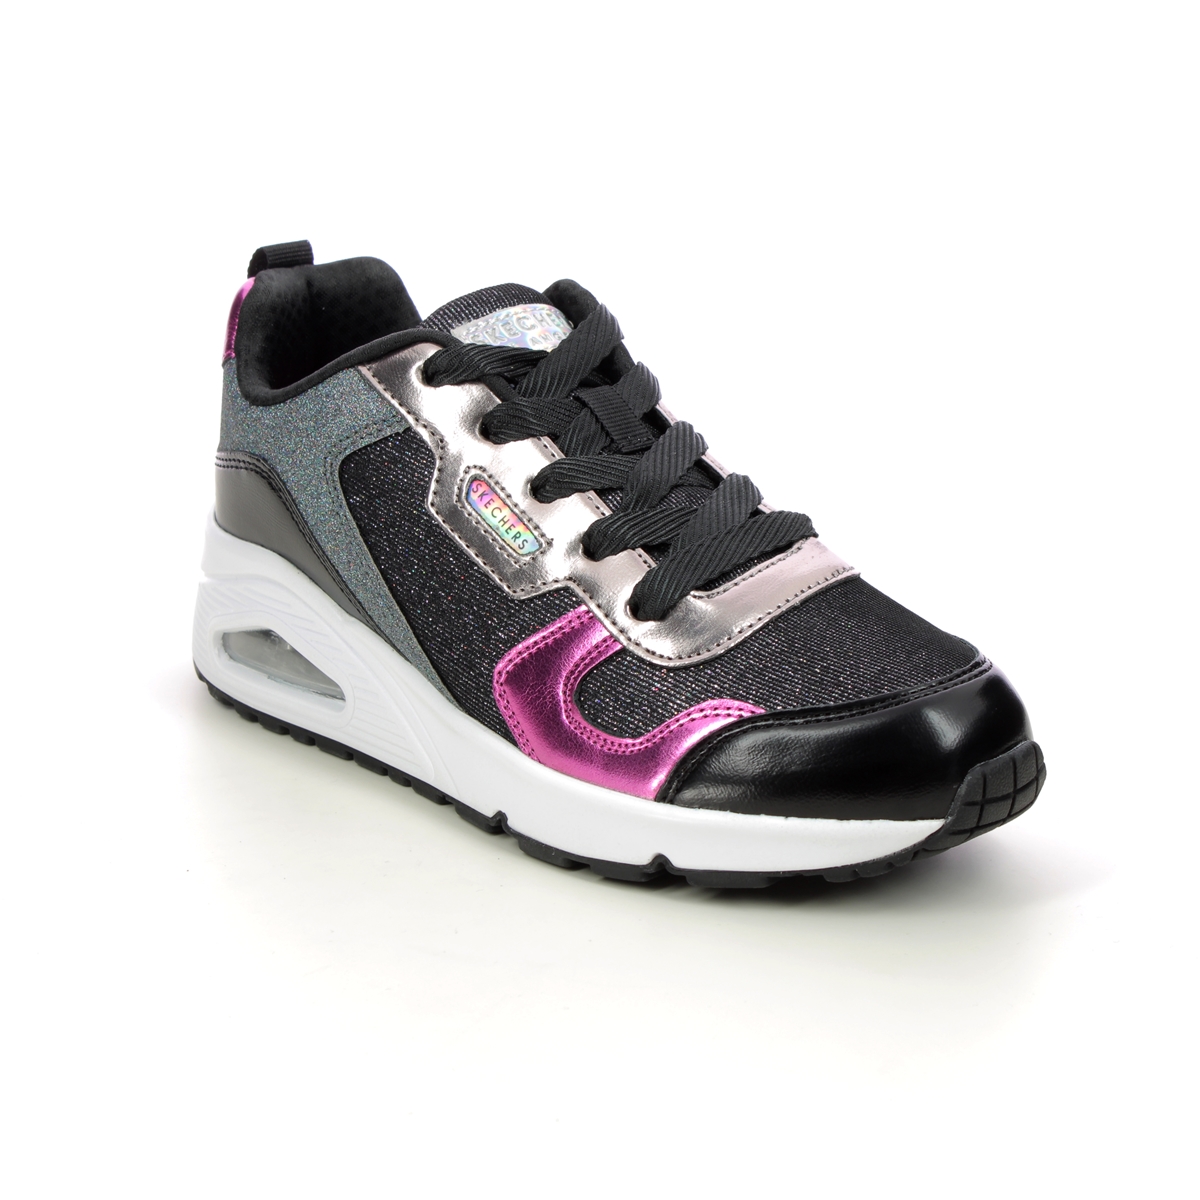 Skechers Uno Remix Lace Black Kids Girls Trainers 310513L In Size 35 In Plain Black For kids